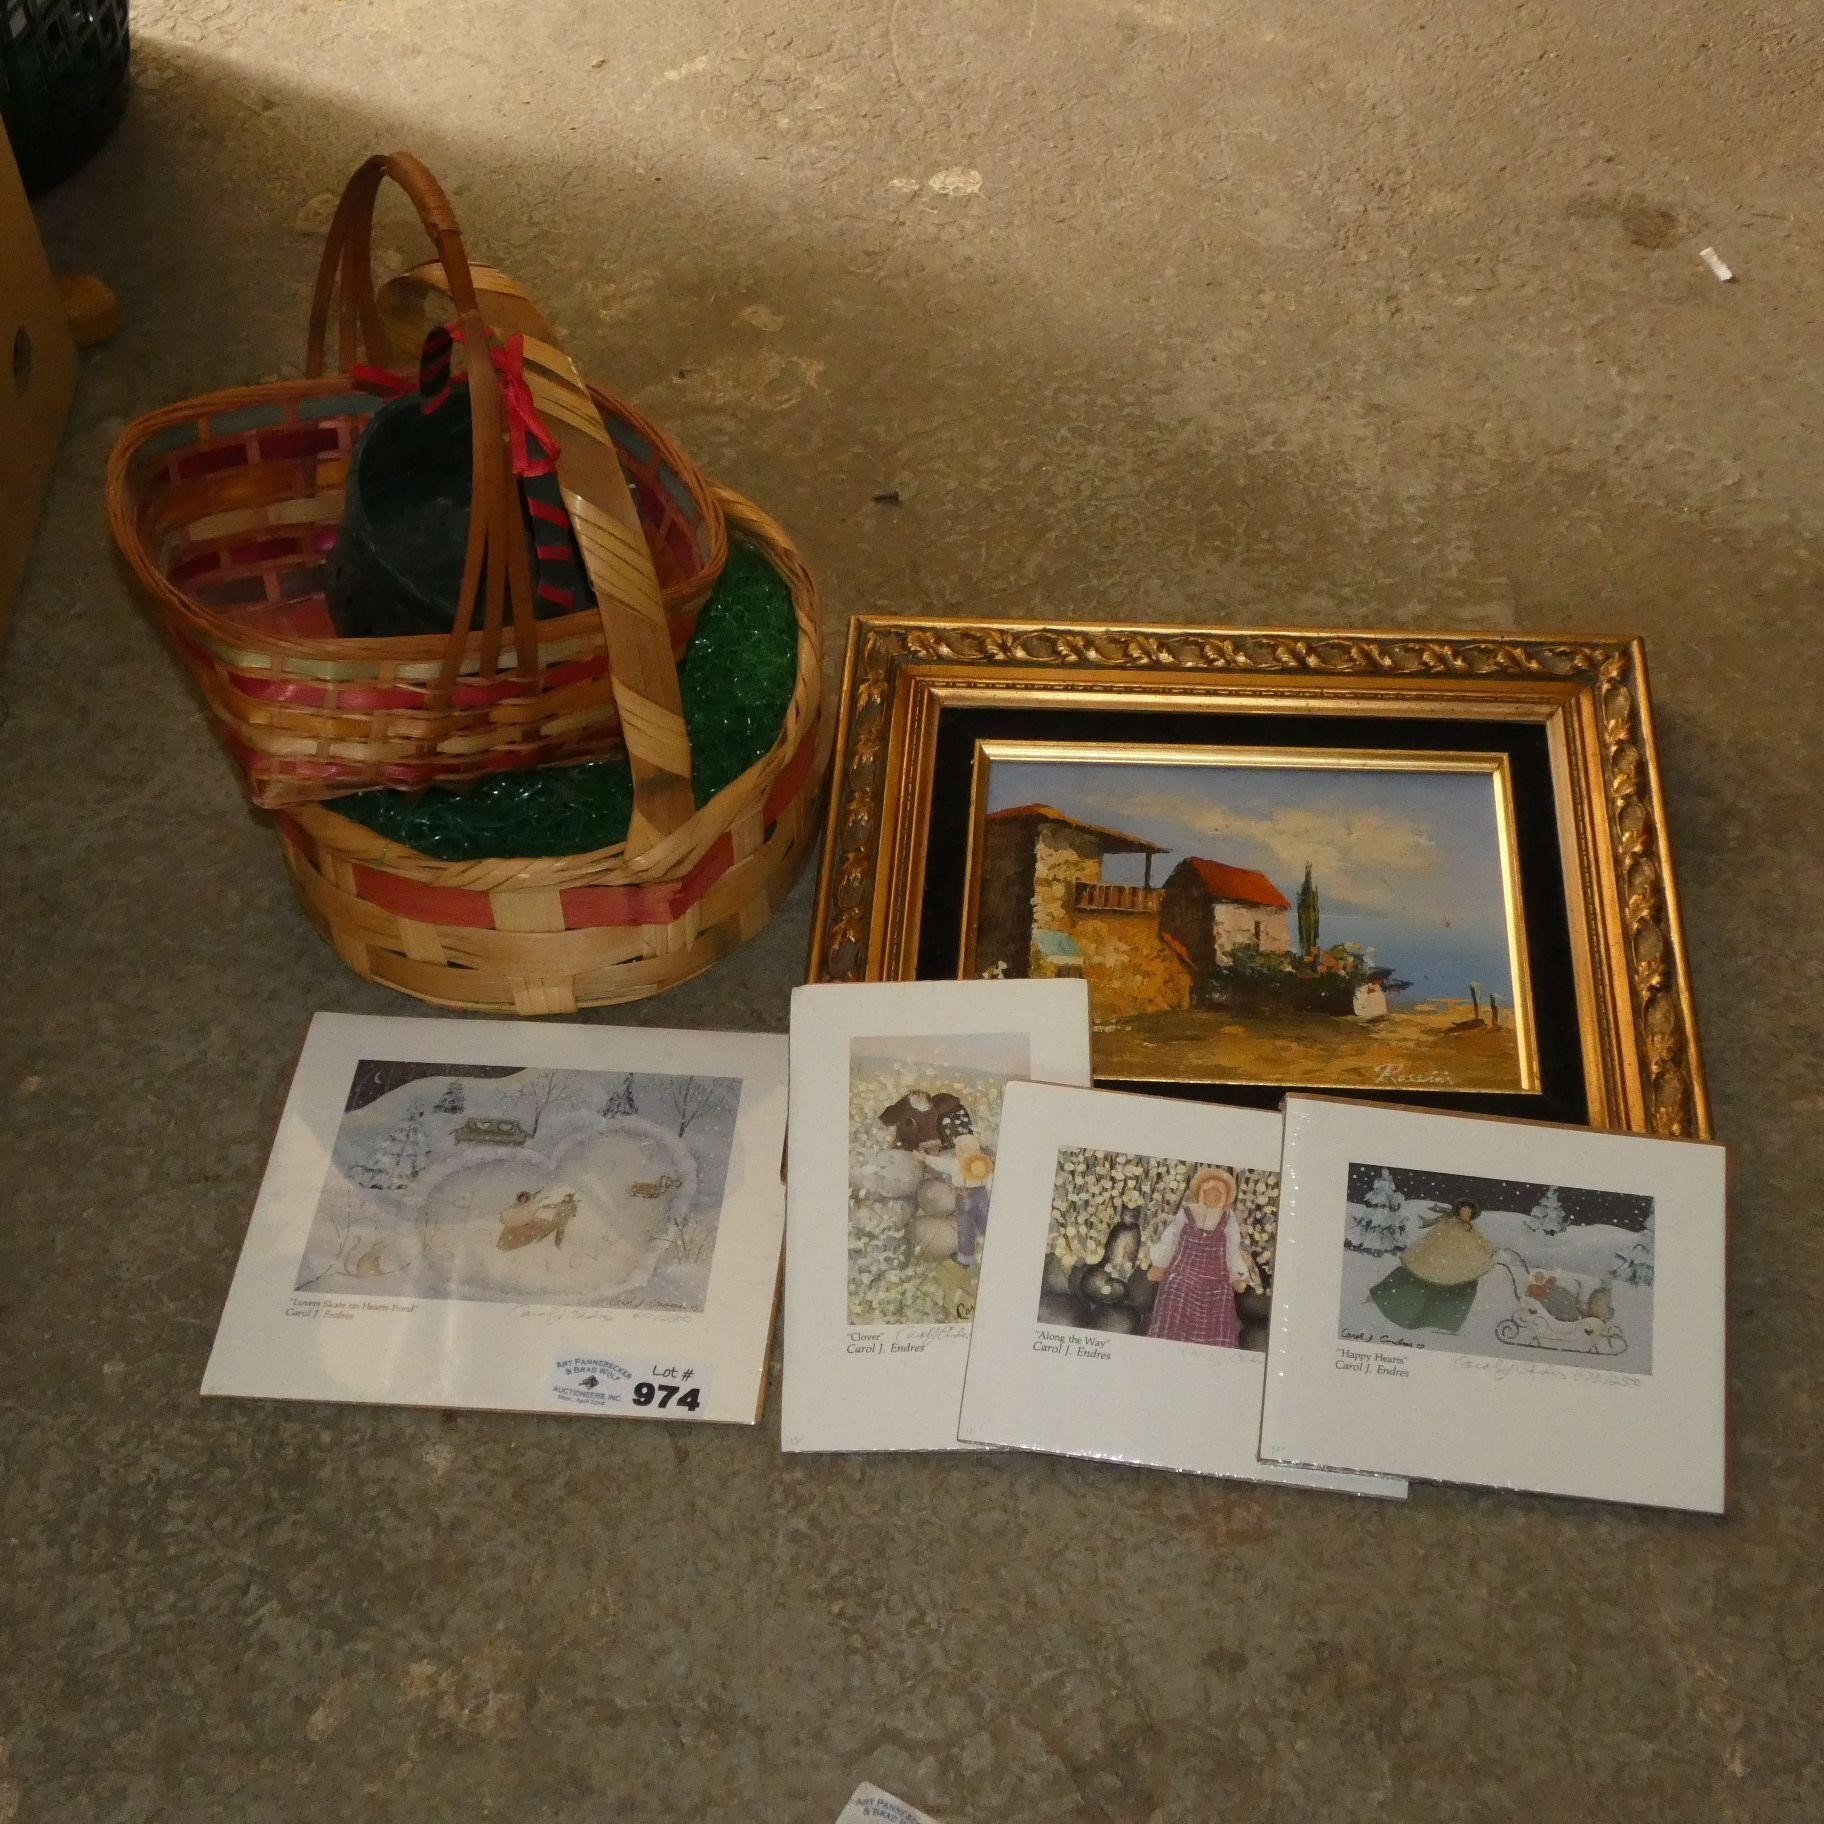 Painting, Prints, Assorted Baskets